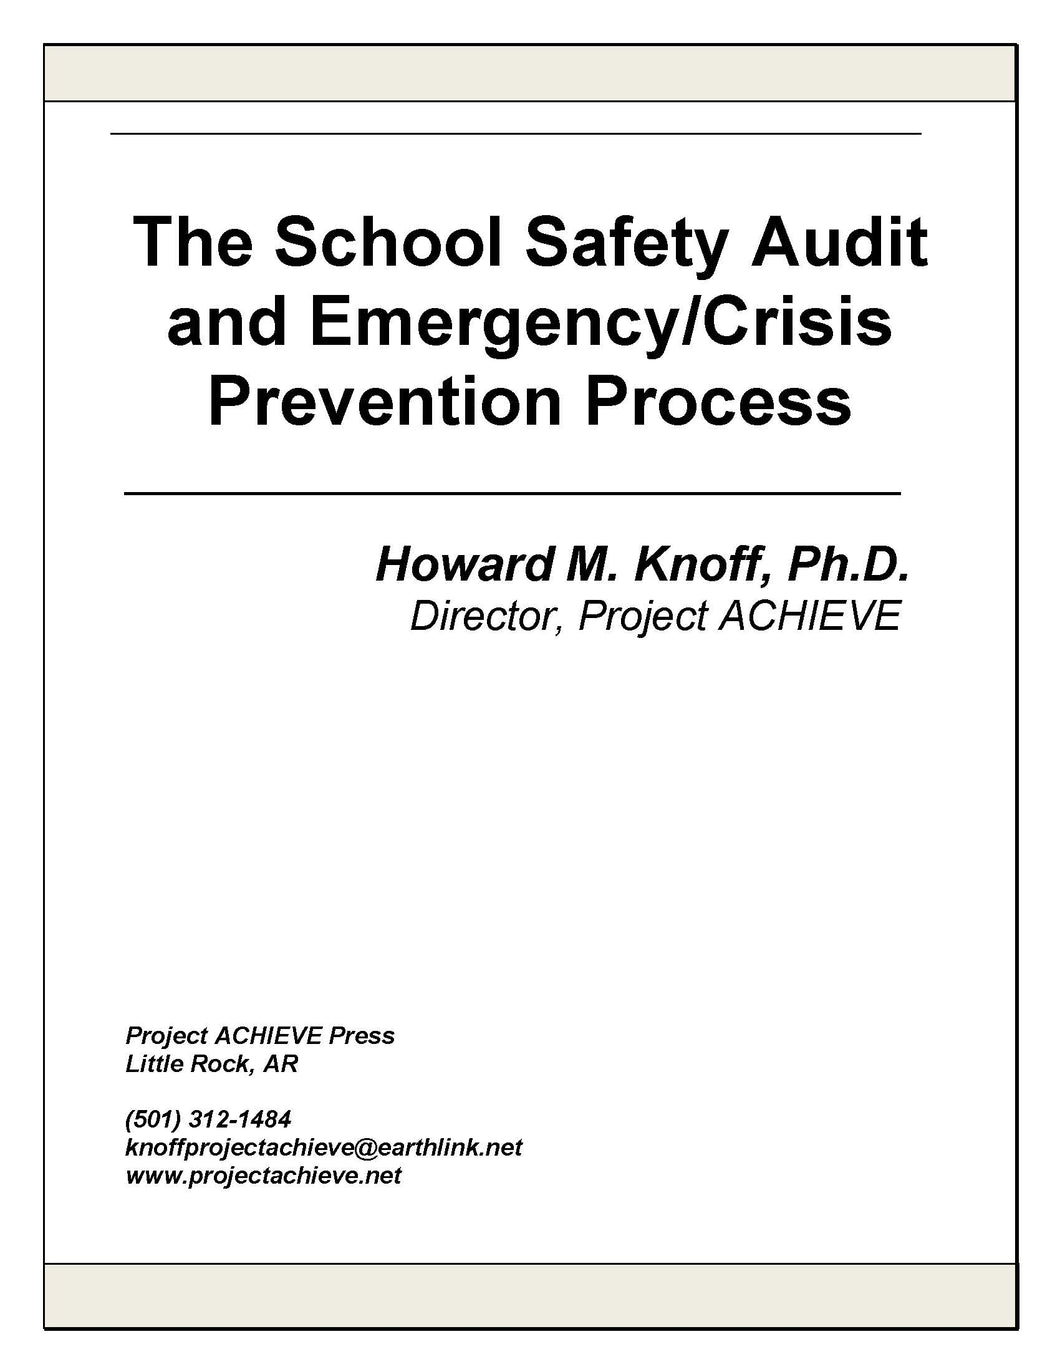 The School Safety Audit and Emergency/Crisis Prevention Process